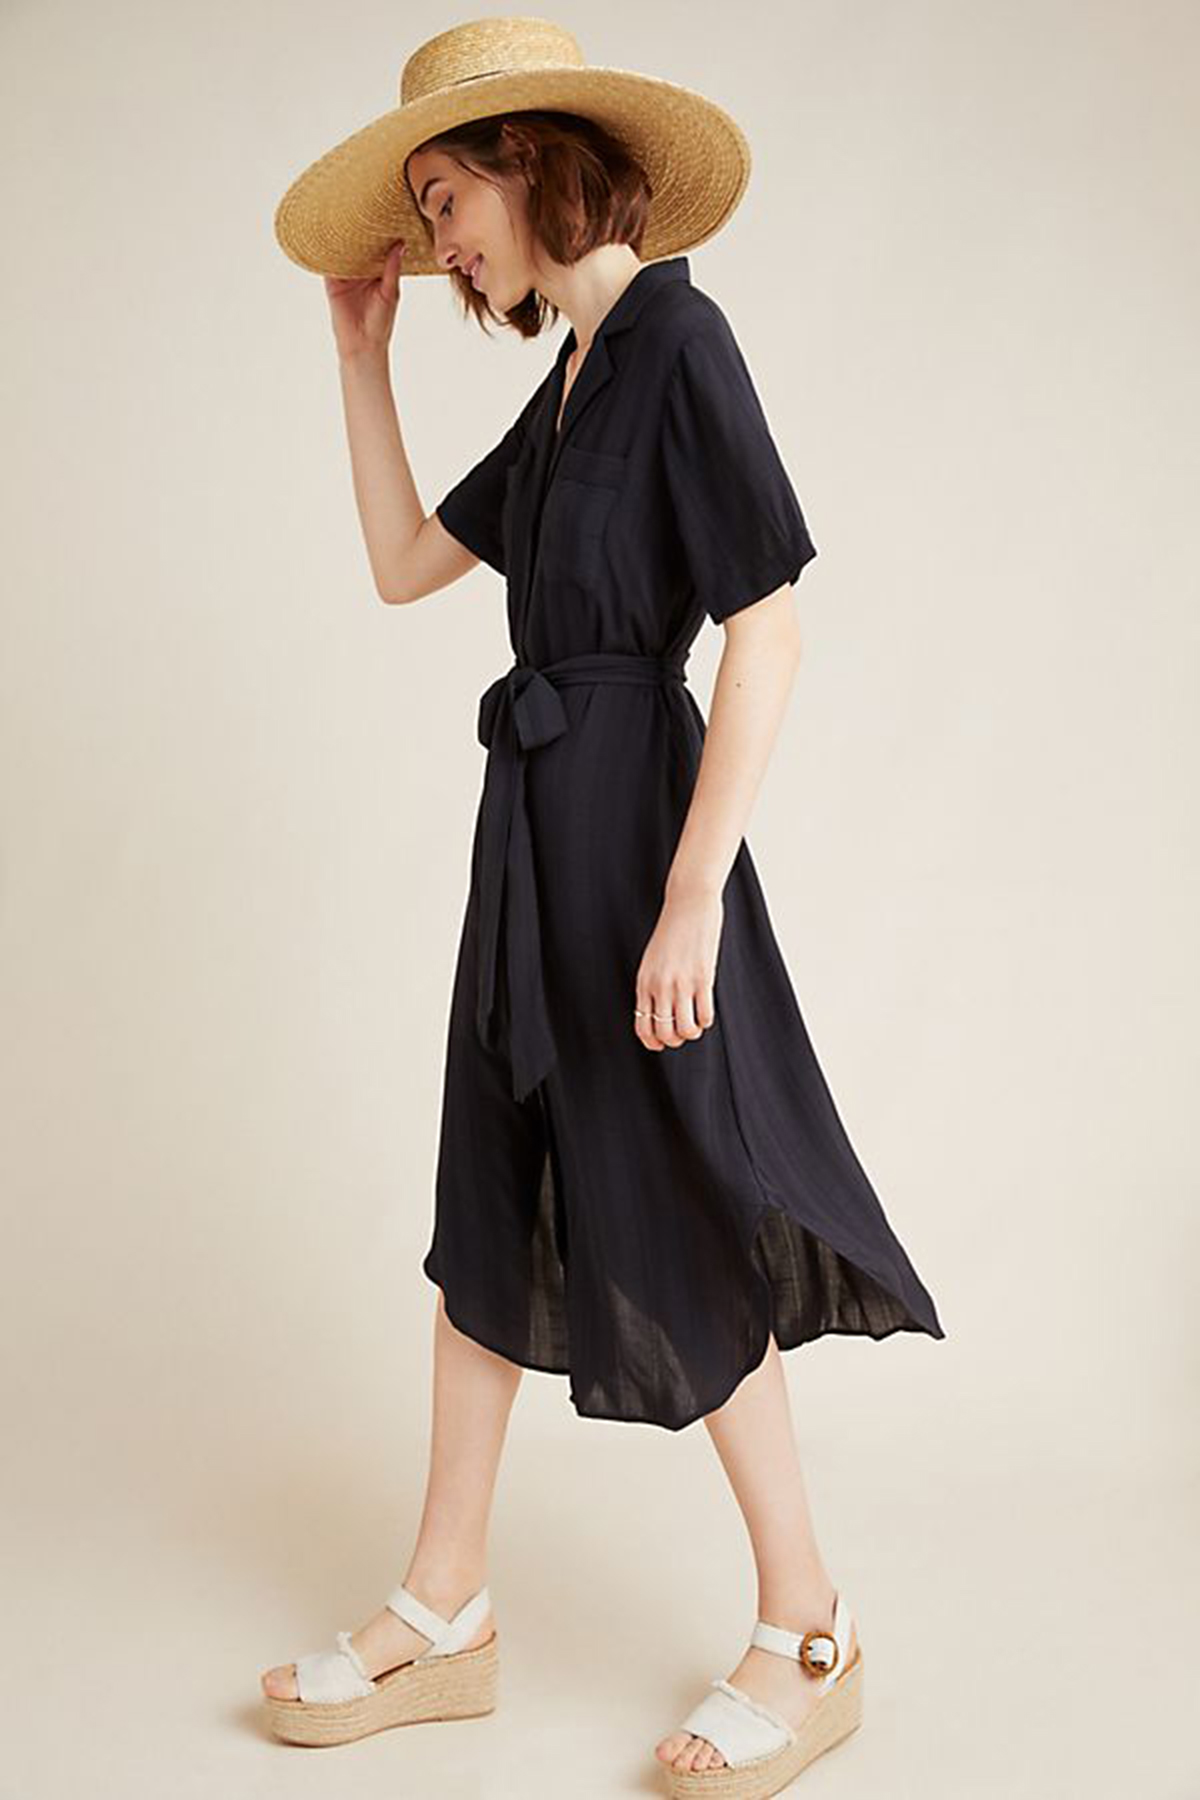 This Beautiful Top-Rated Dress Is Only Available at Anthropologie